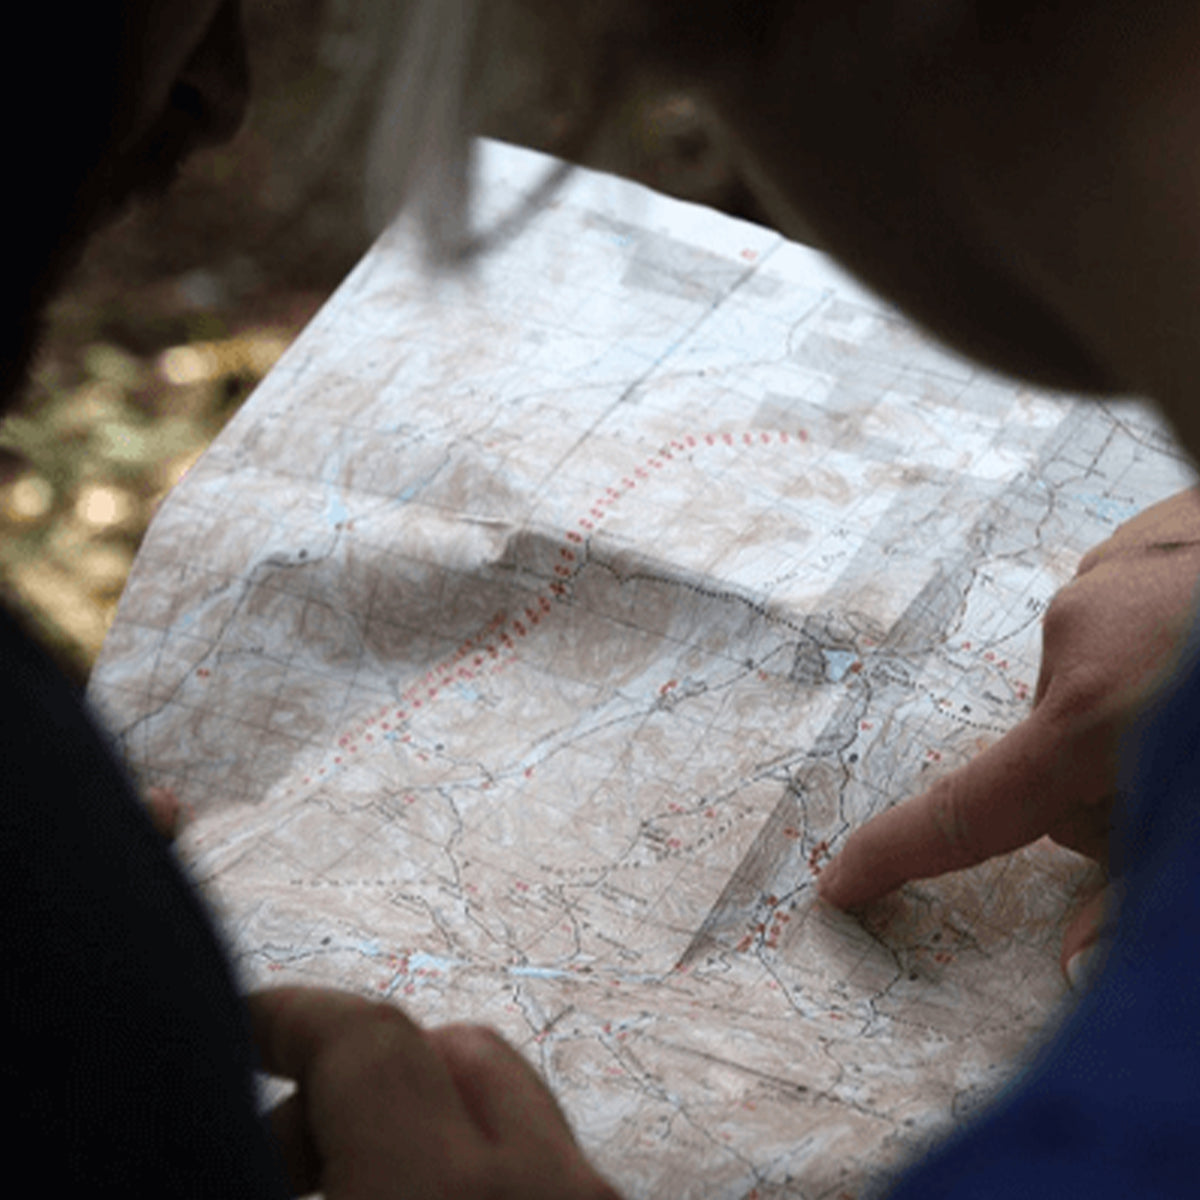 Hikers looking at a map of the area